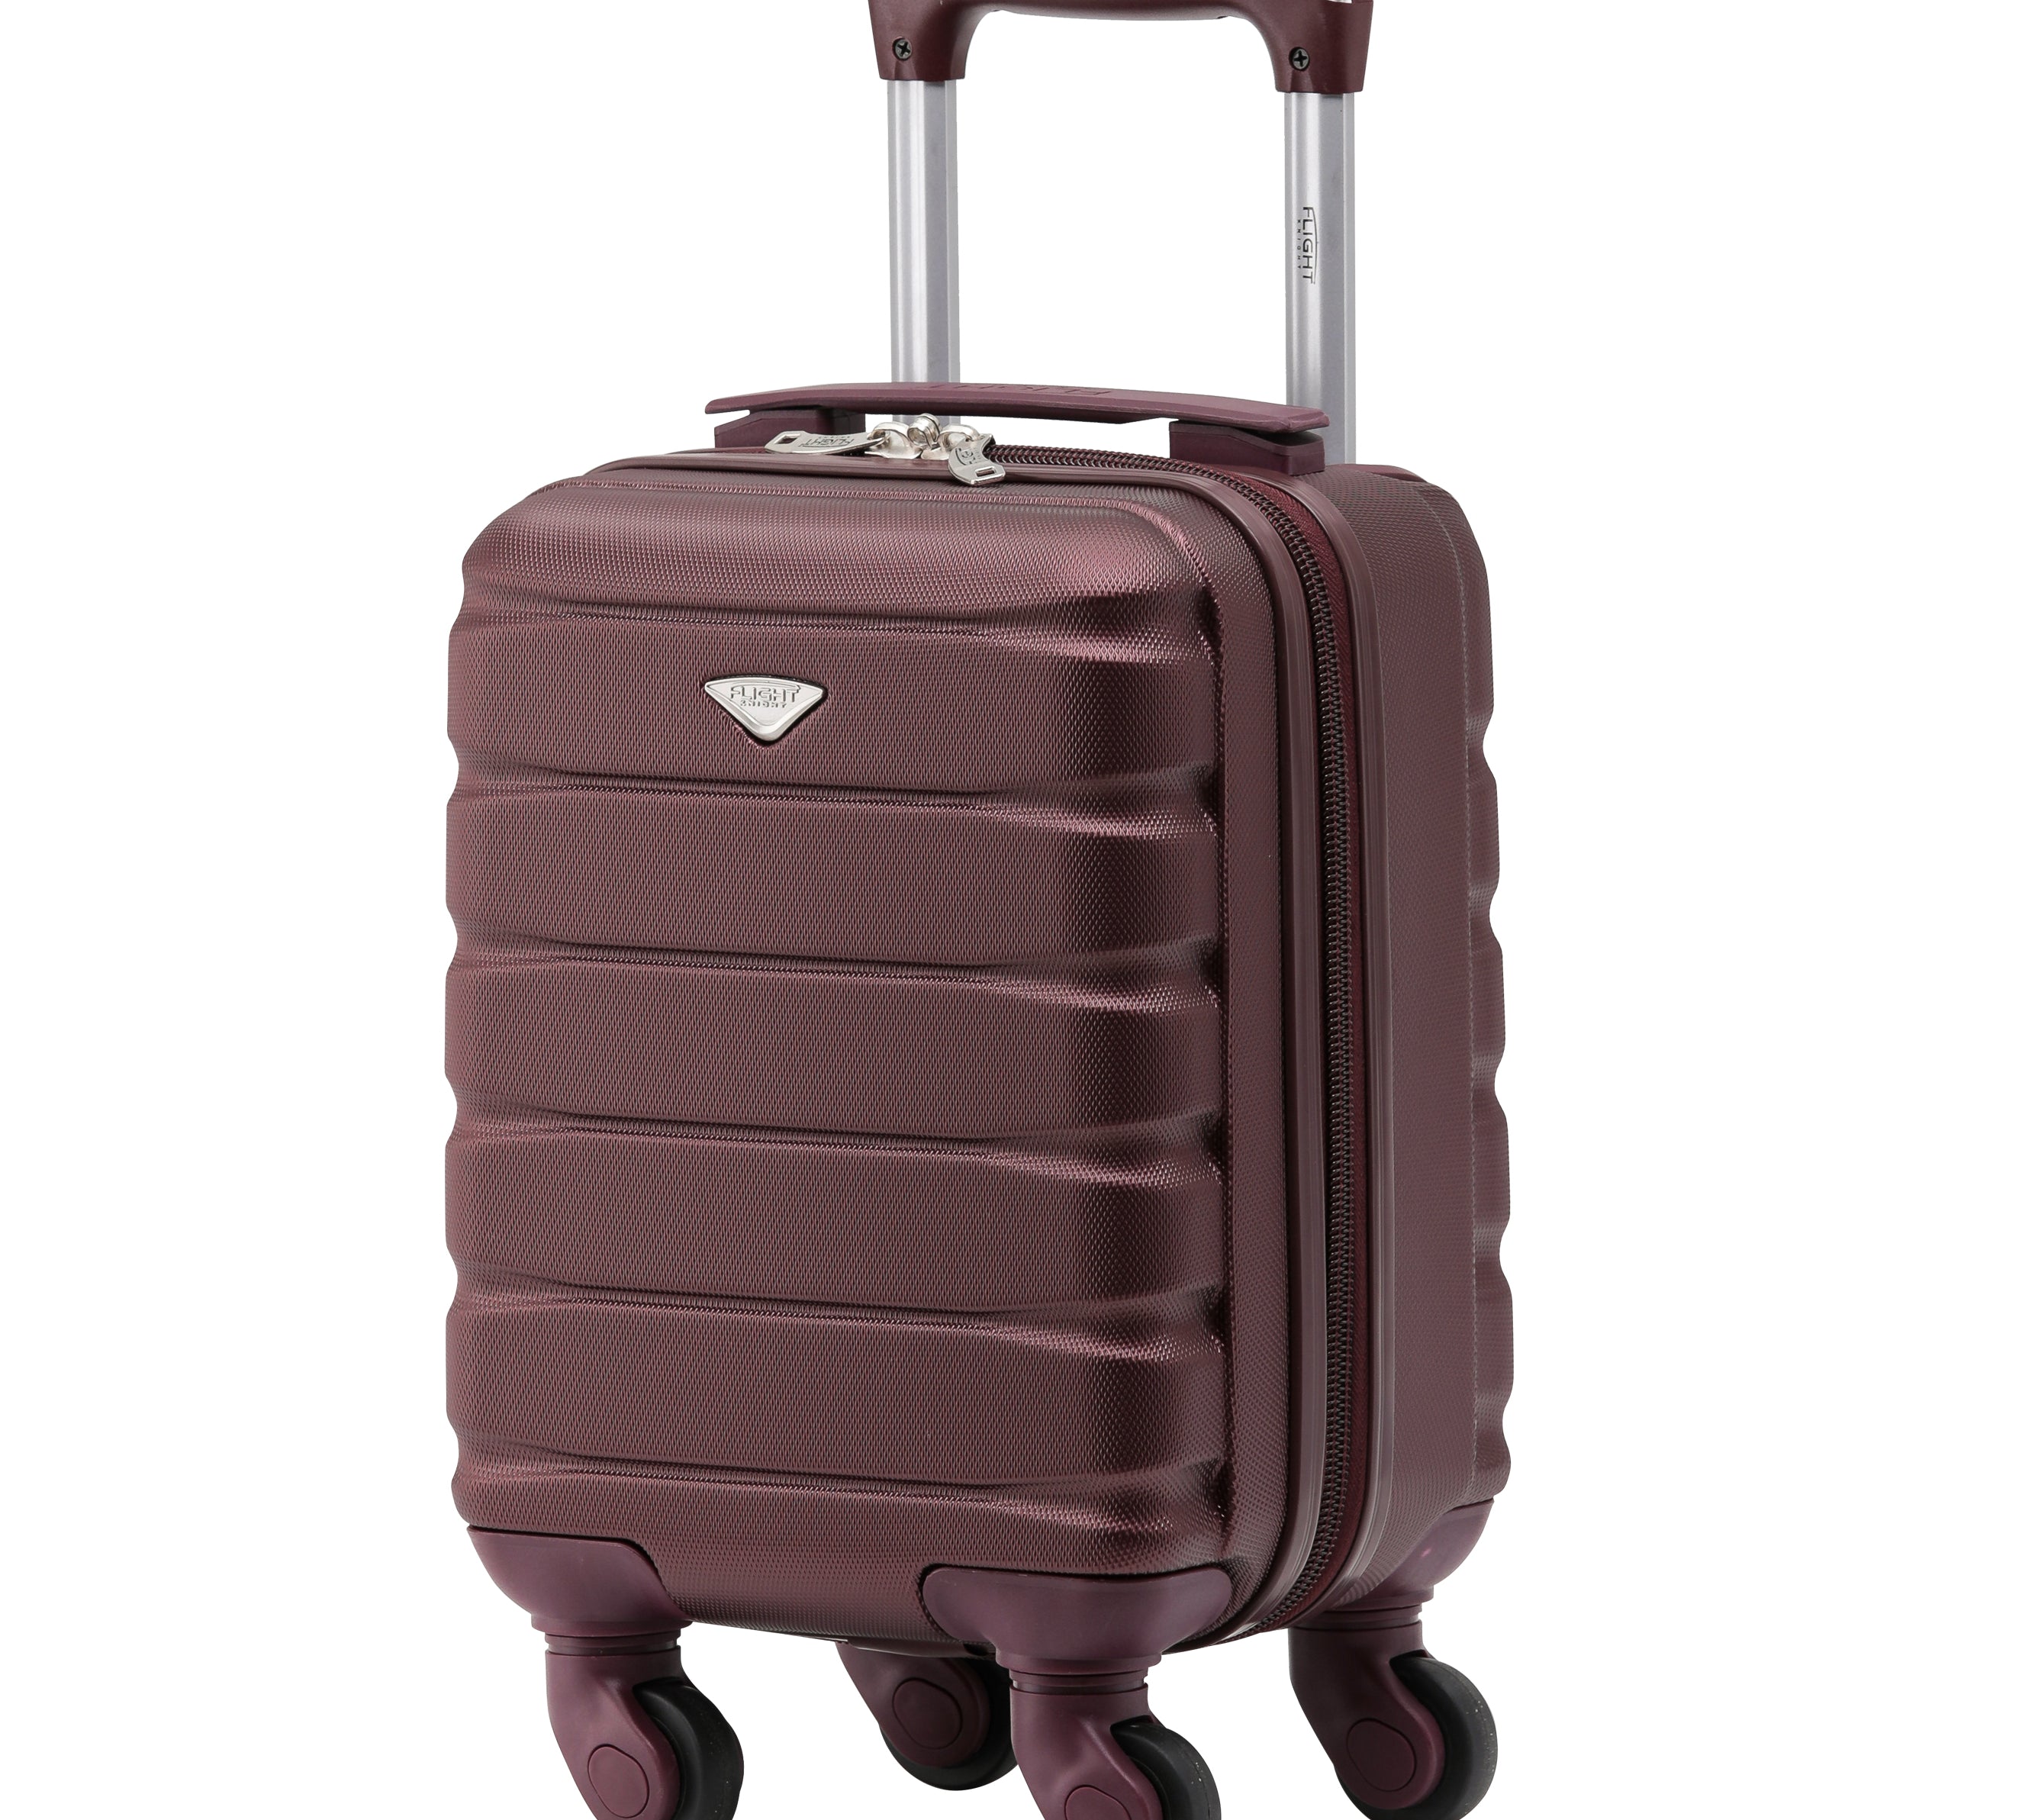 40x20x25cm Lightweight 4 Wheel ABS Hard Case Cabin Carry On Hand Luggage 100+ Approved Airlines Including BA, easyJet & Maximum Size for Ryanair